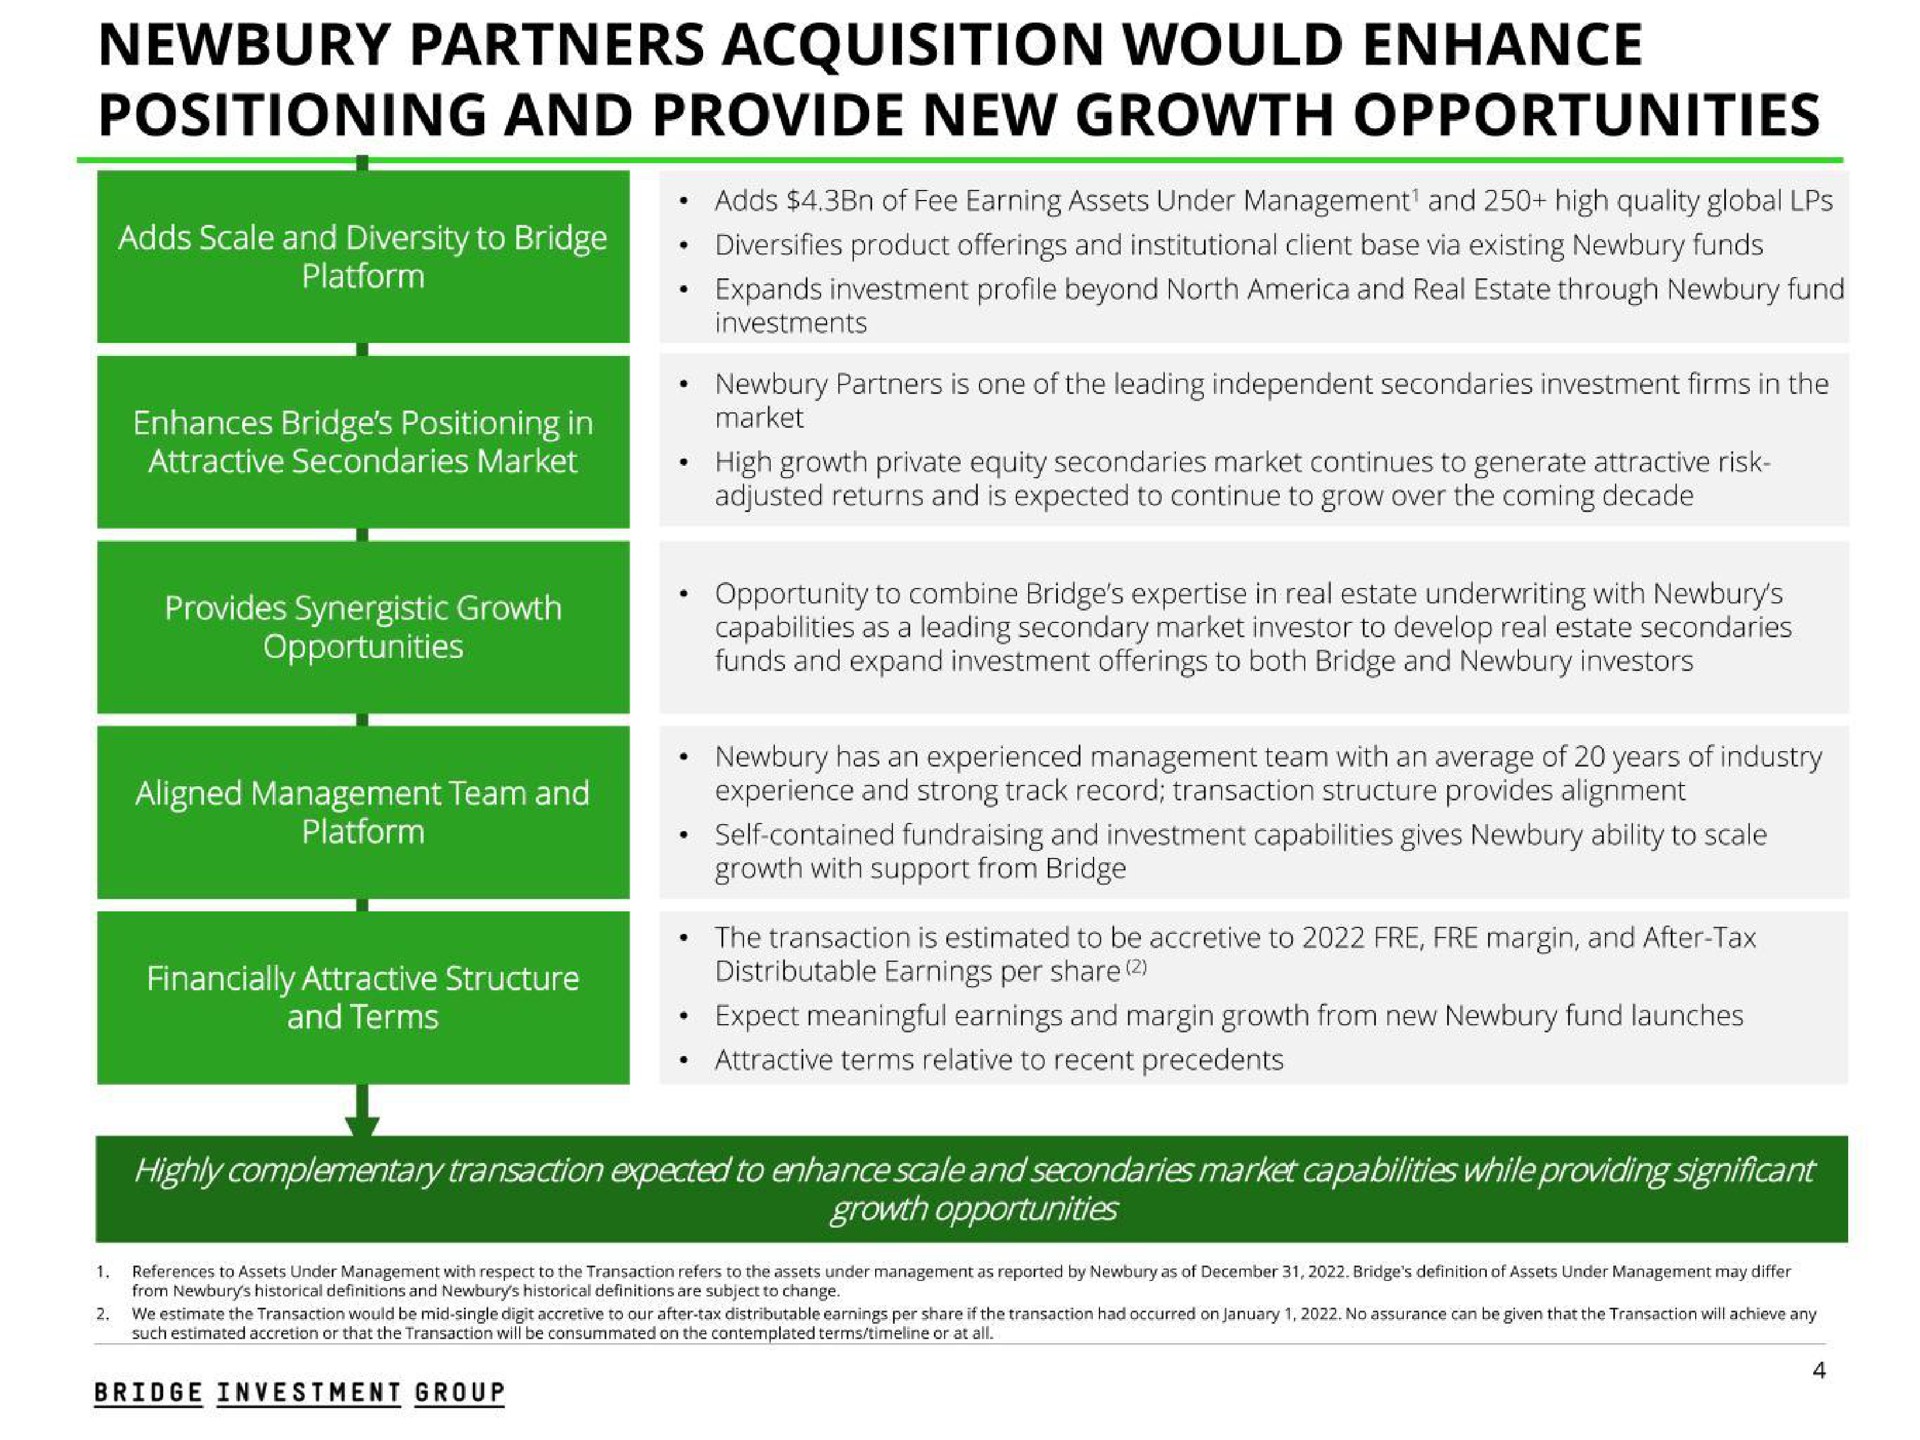 partners acquisition would enhance positioning and provide new growth opportunities | Bridge Investment Group